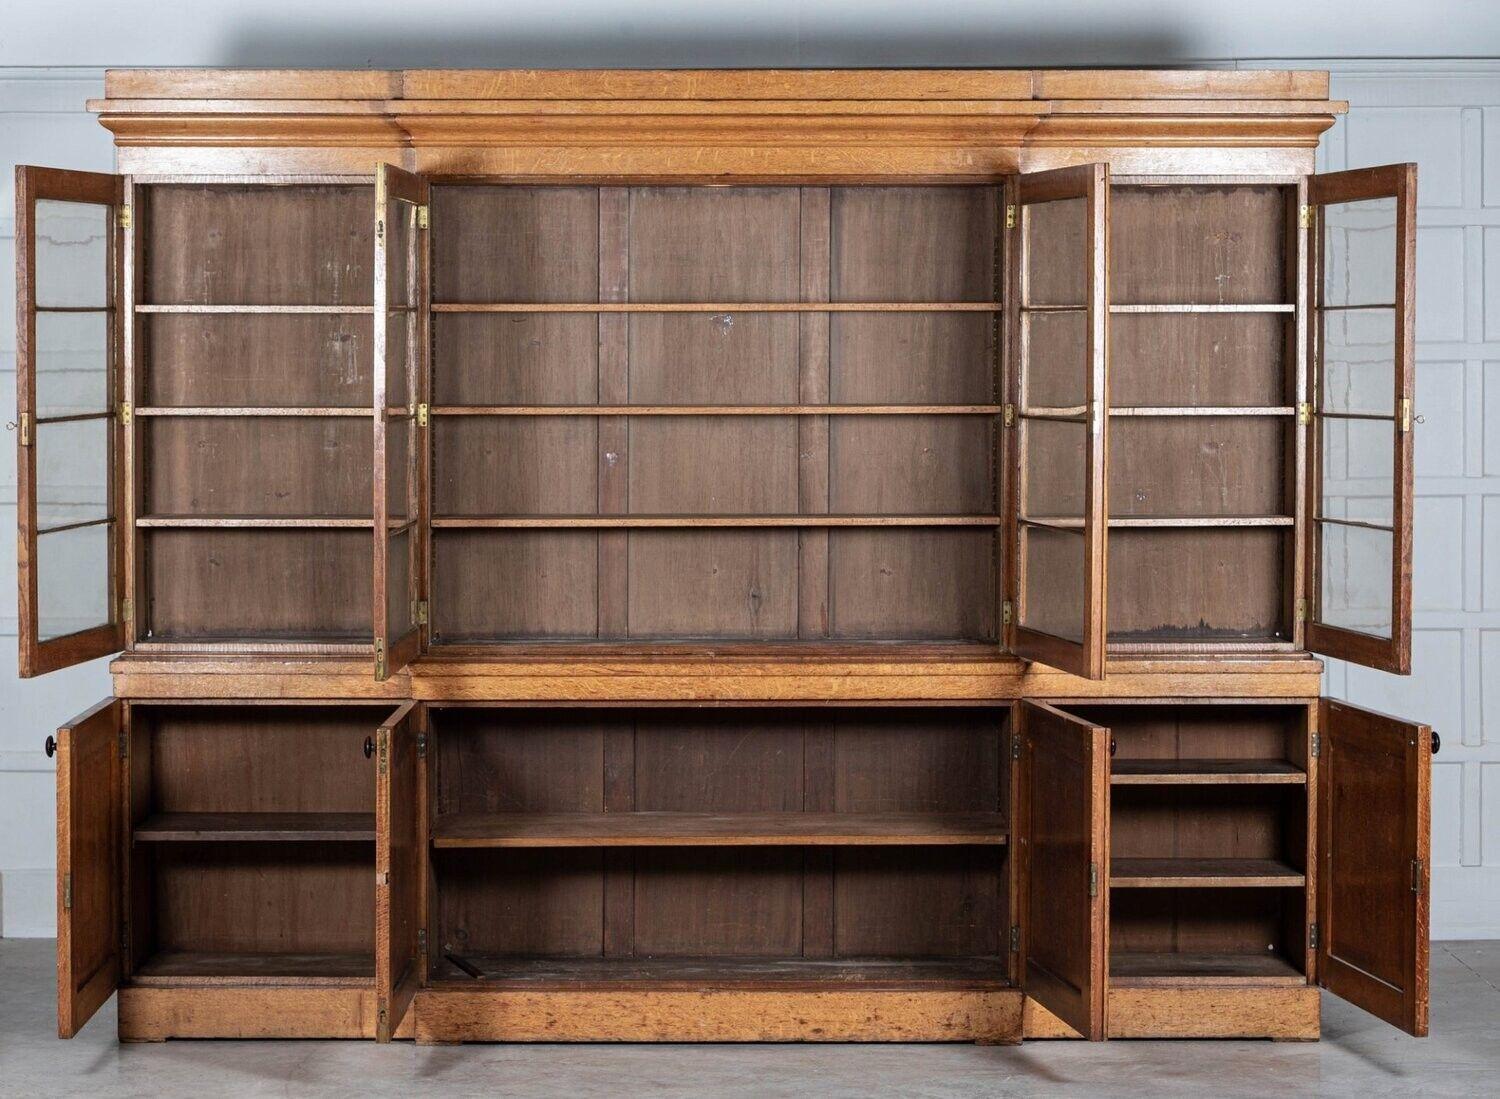 circa 1880
Monumental 19thC English Glazed Oak Breakfront Bookcase with adjustable shelves and keys
Excellent form, wear and colour. An exceptional example
sku 1162
W319 x D48 x H247 cm
Base W307 x D52 x H98 cm
Top W319 x D42 x H149 cm.